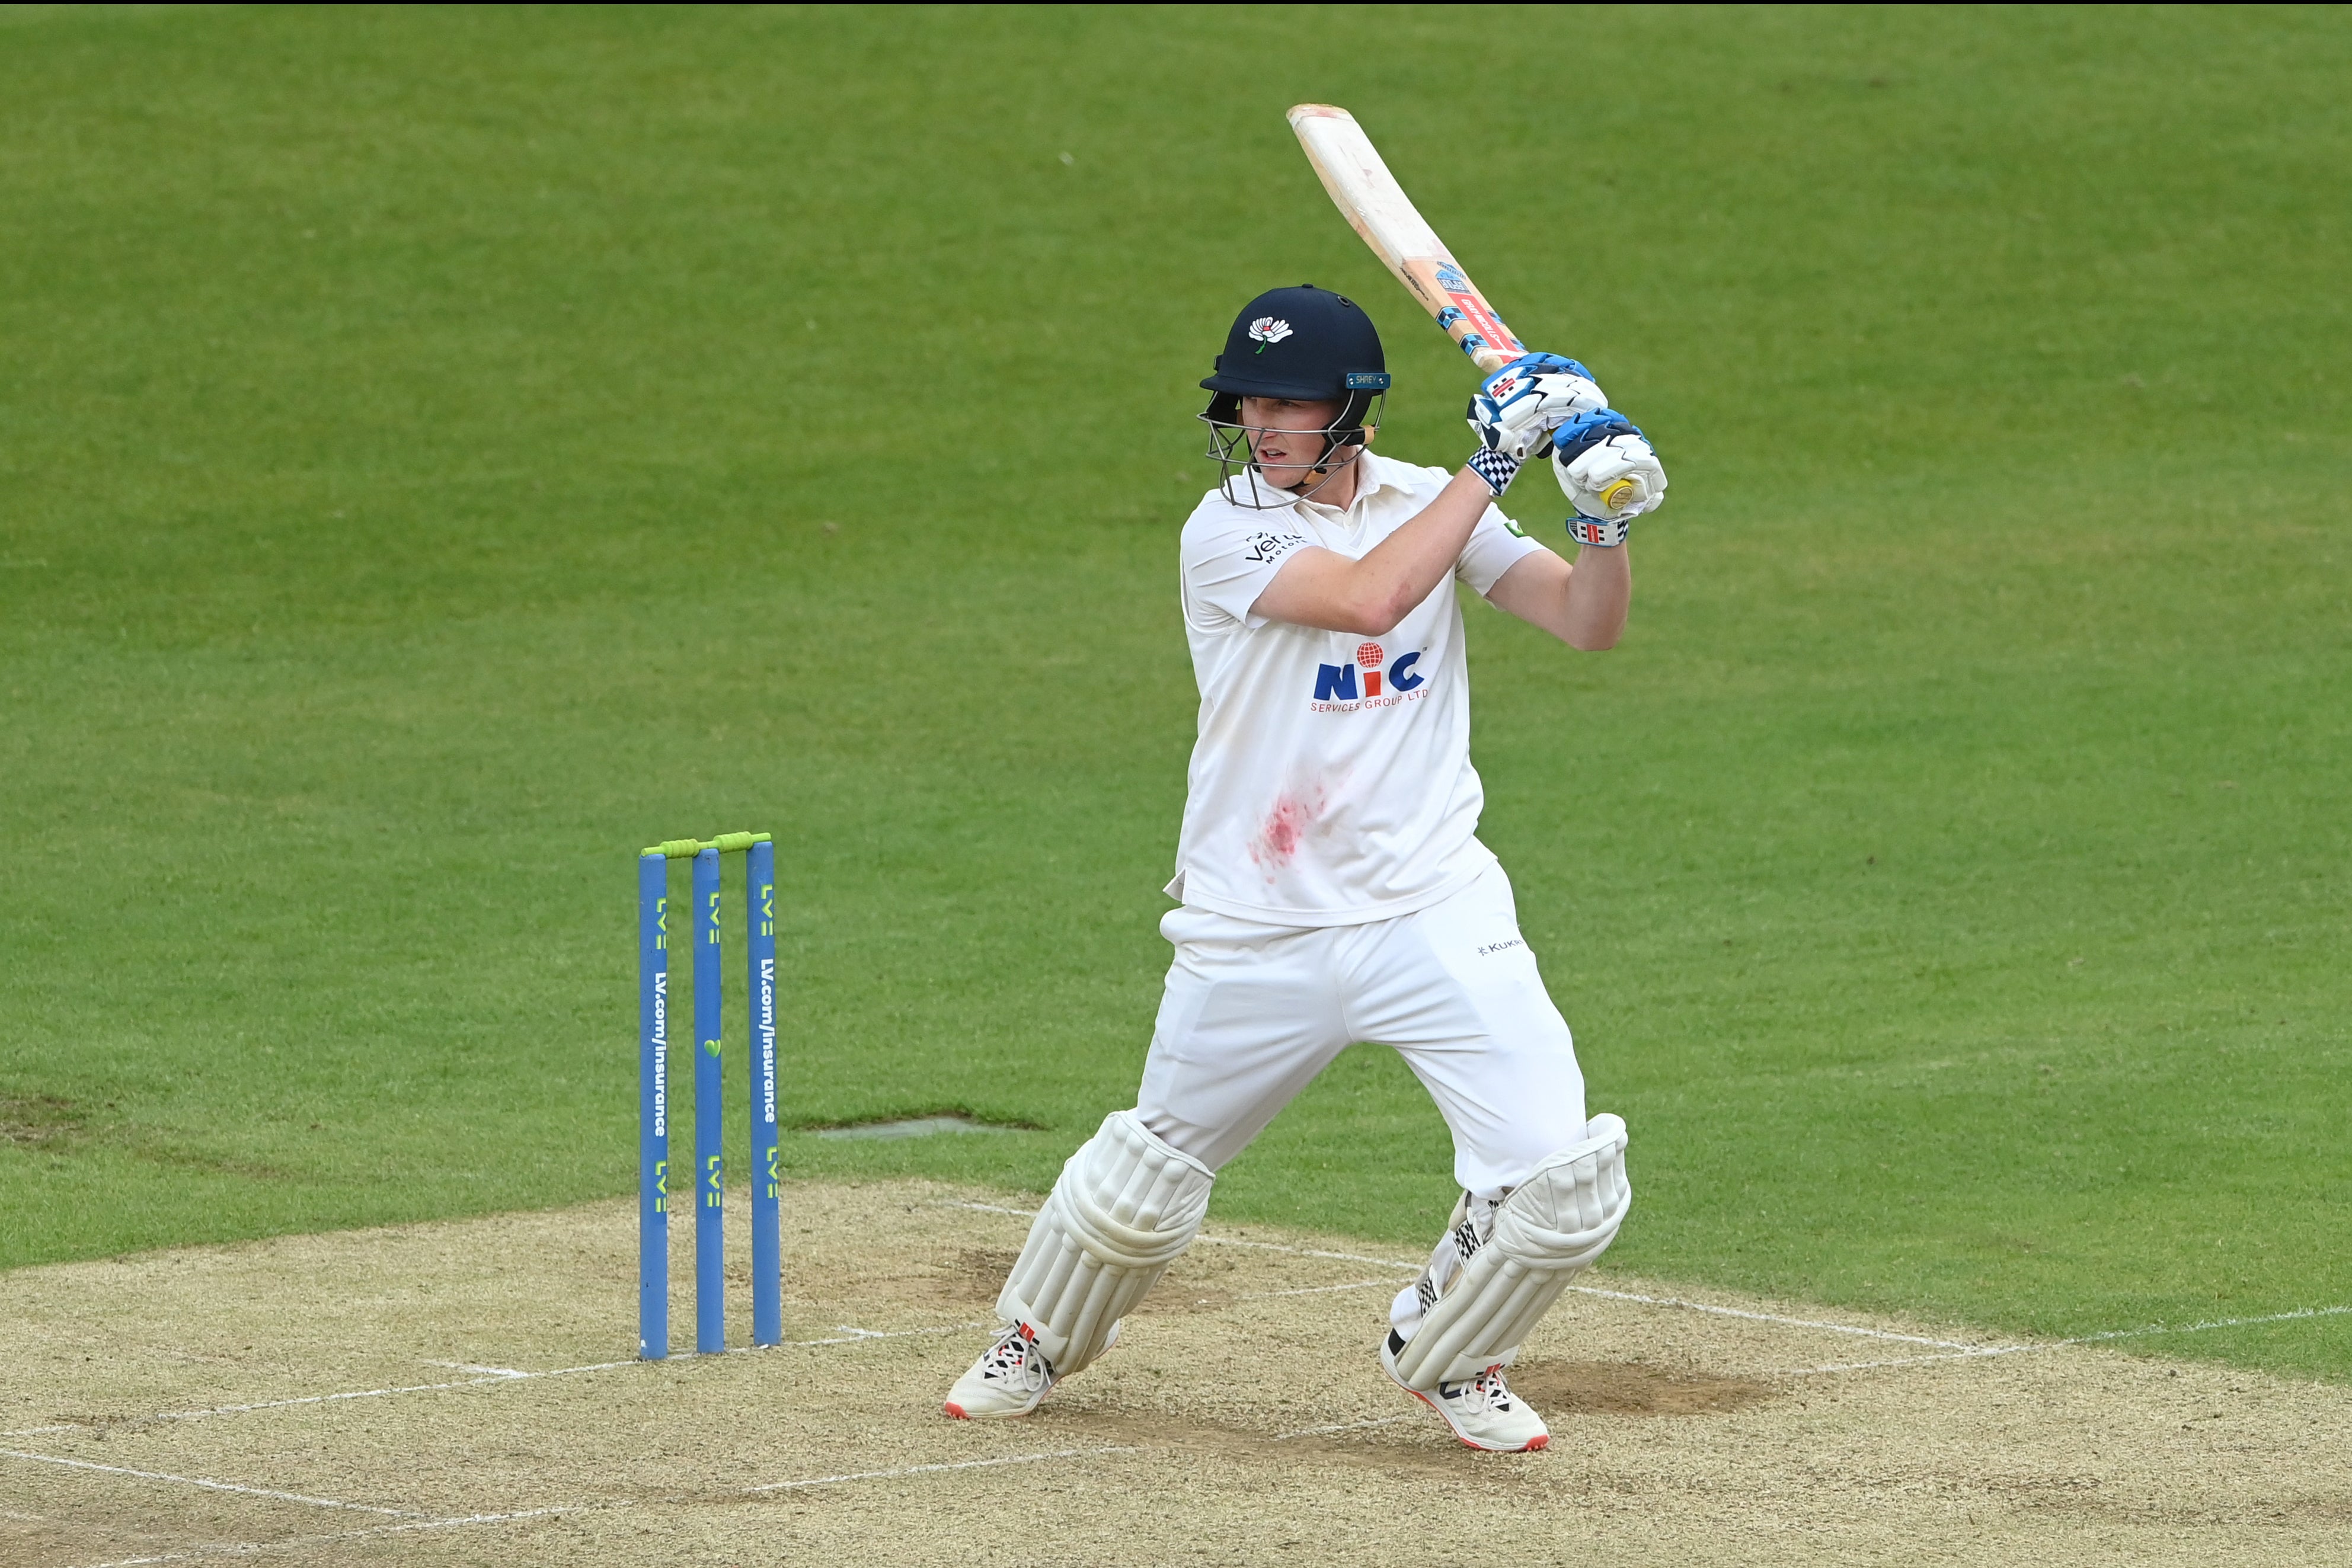 Harry Brook is set to feature for Yorkshire in the County Championship